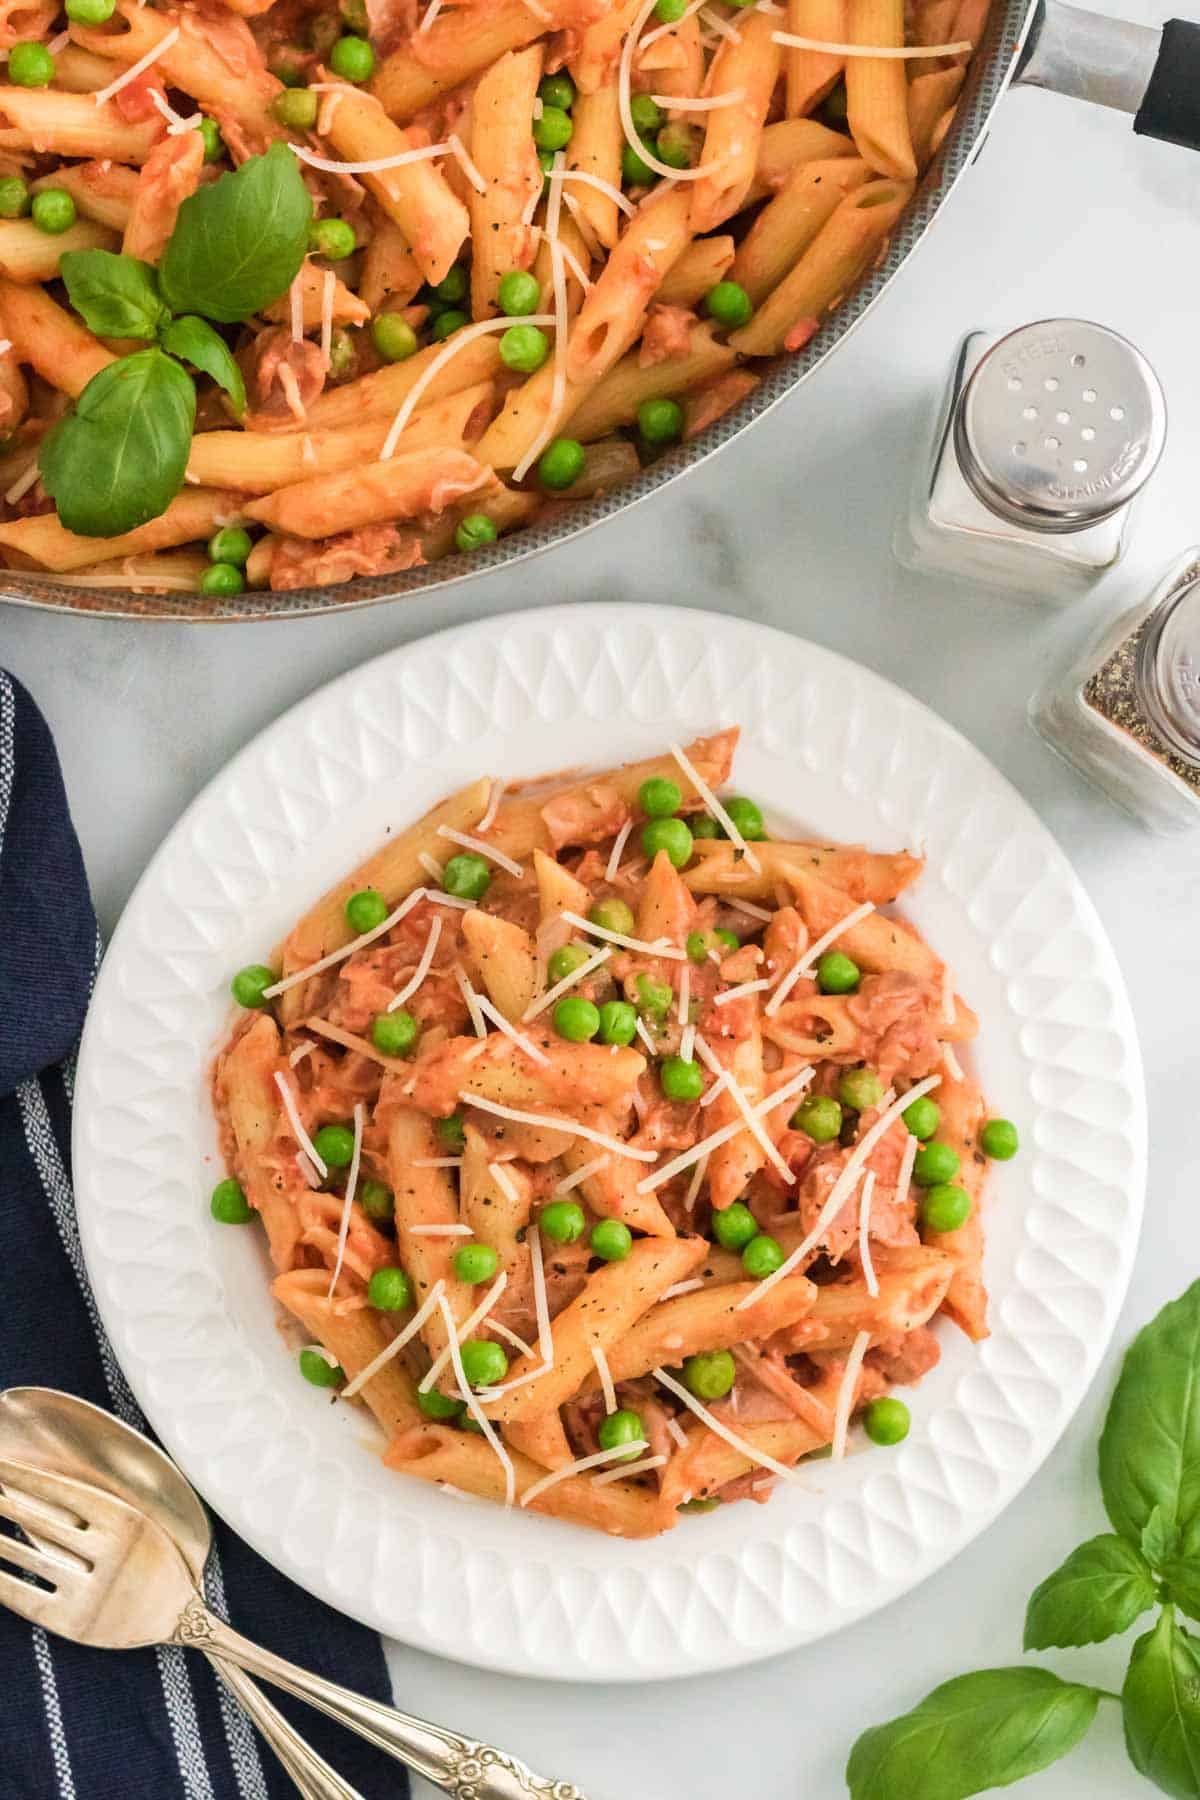 Penne with tomato cream sauce on a plate topped with peas and prosciutto, next to a pan of pasta.